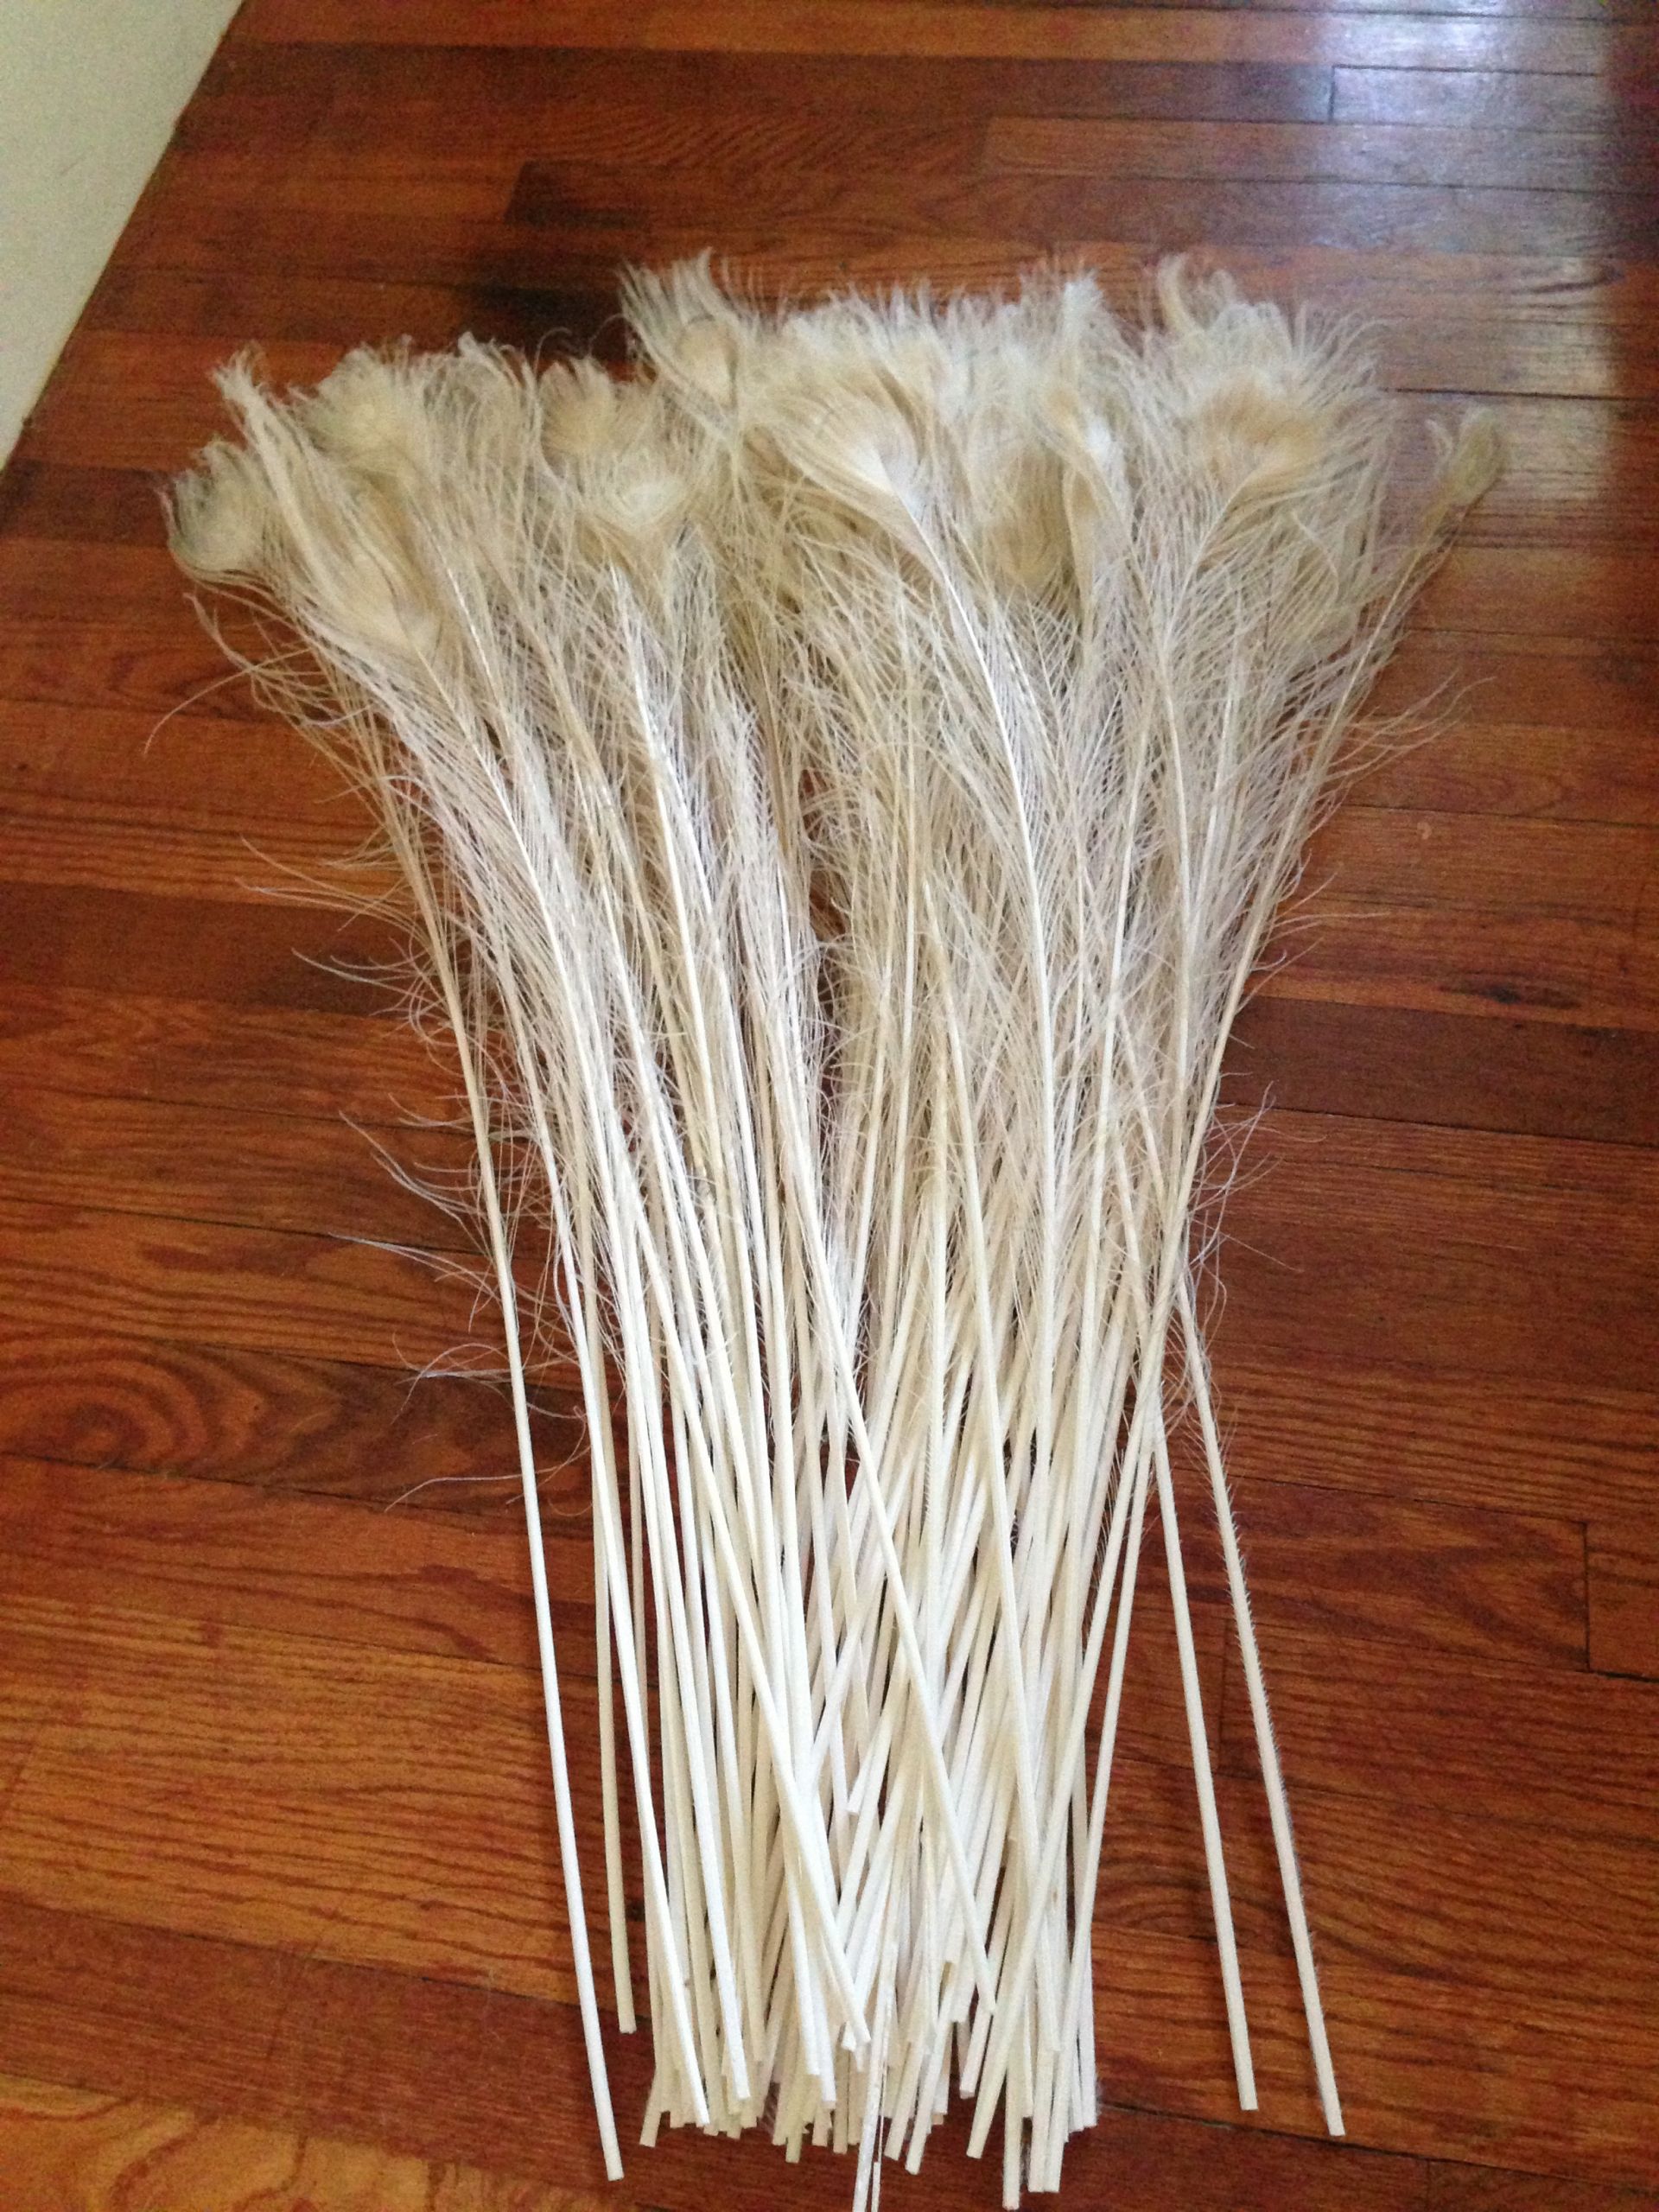 Used Rustic Wedding Decorations For Sale
 Used Wedding Decor For Sale